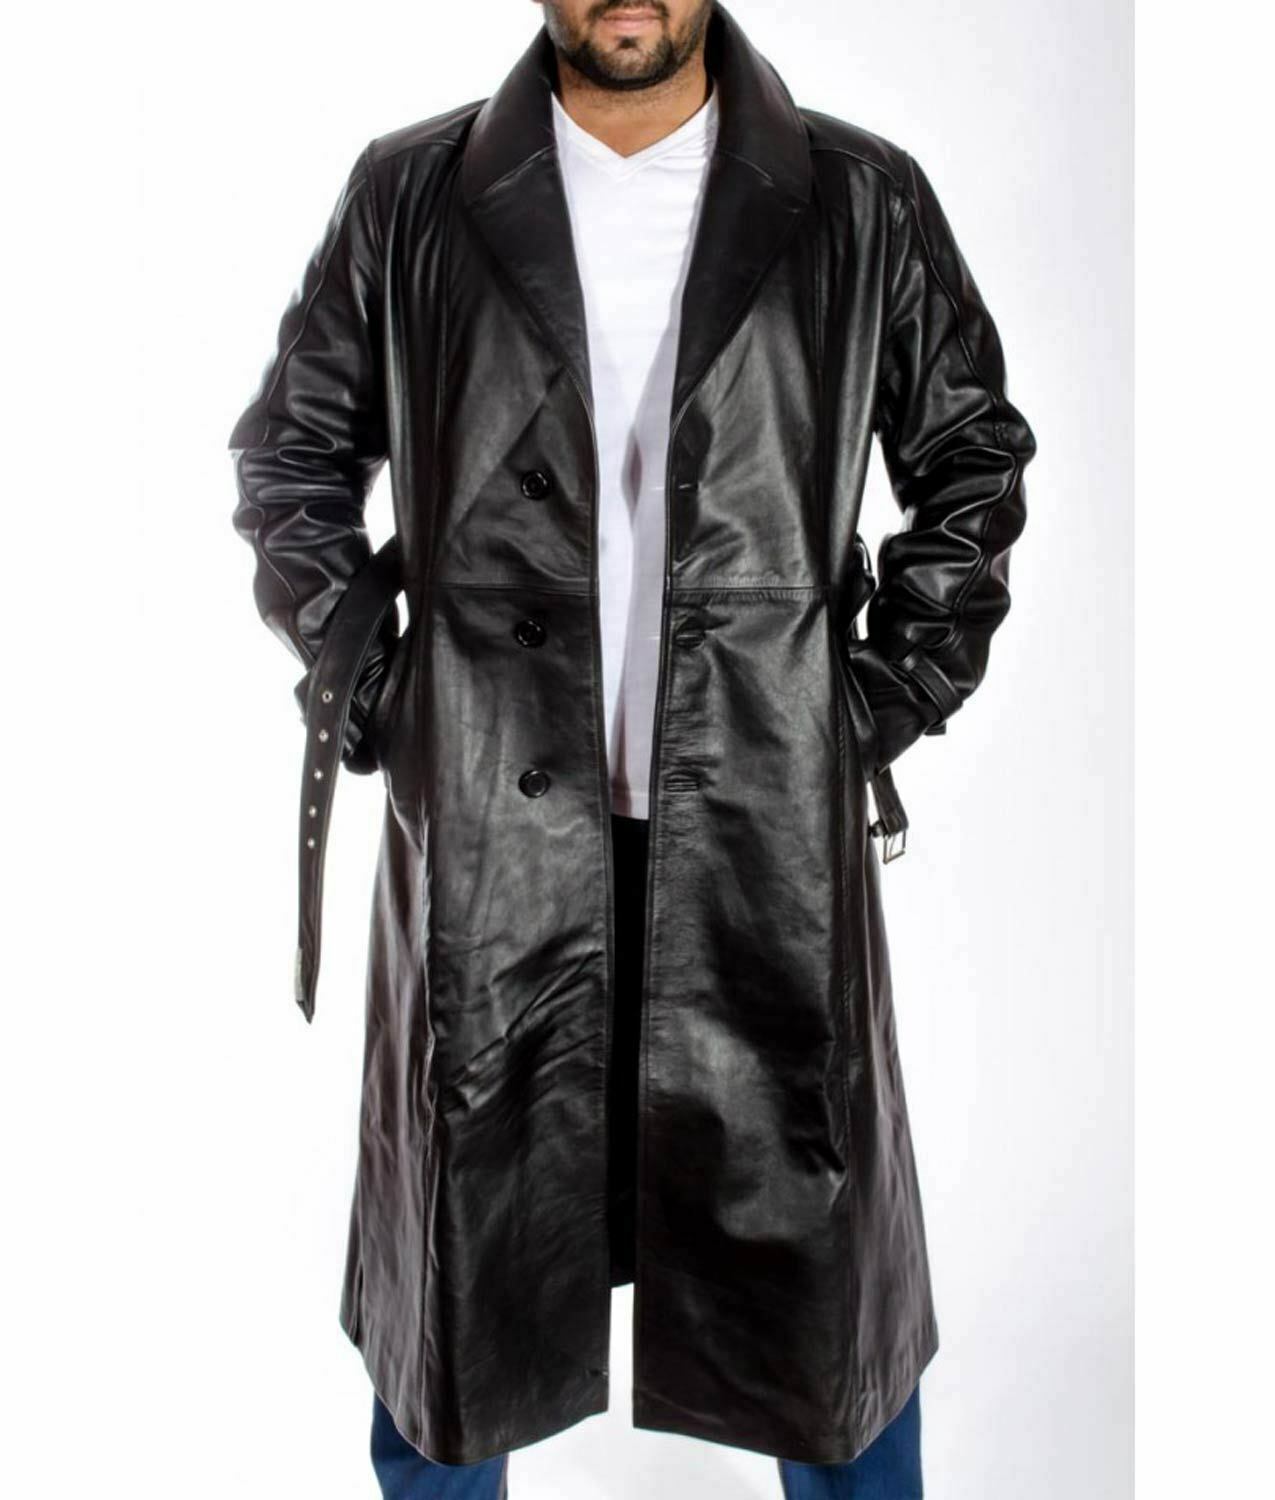 Spine Spark Men's Mickey Rourke Sin City Leather Trench Long Coat